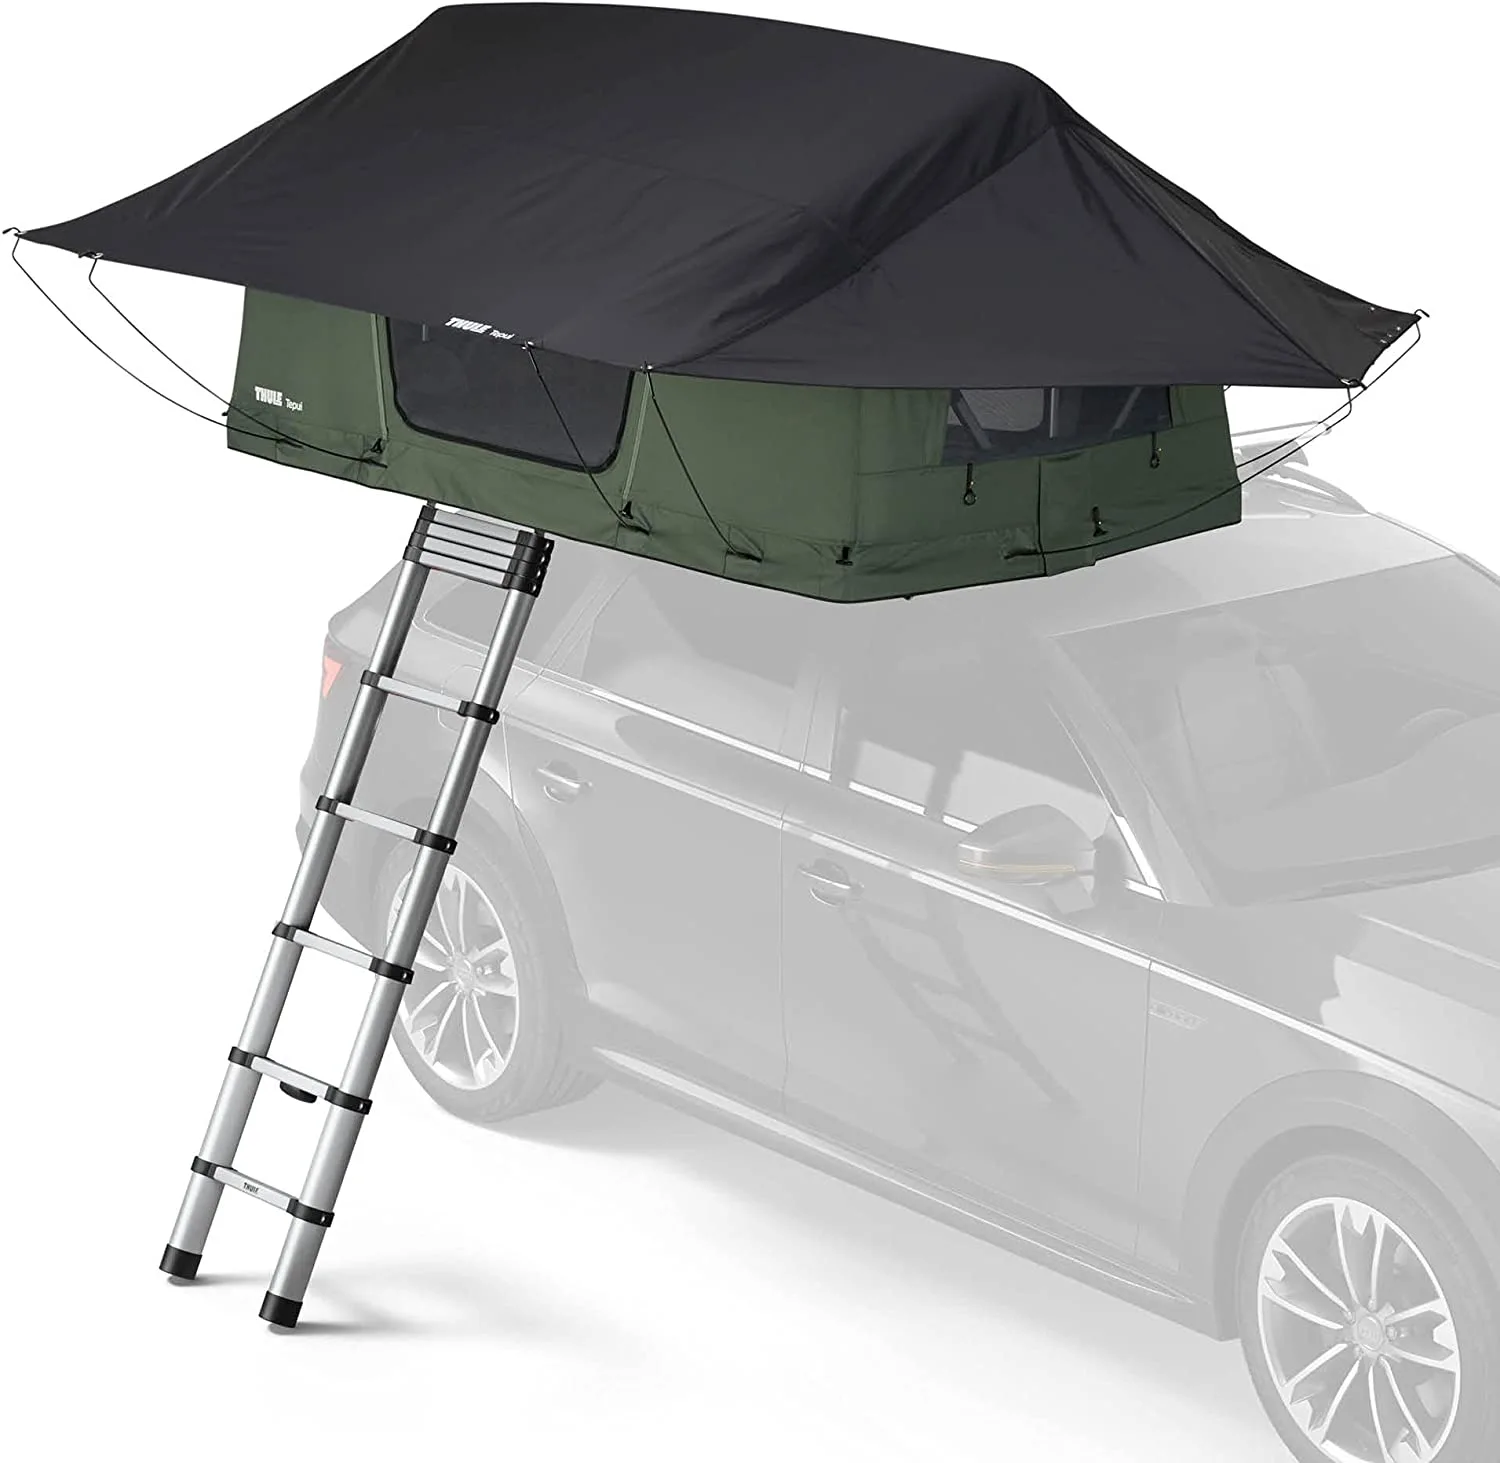 Thule Tepui best low profile rooftop tent for SUVs and Jeeps - best rooftop tents for SUVs and Jeep